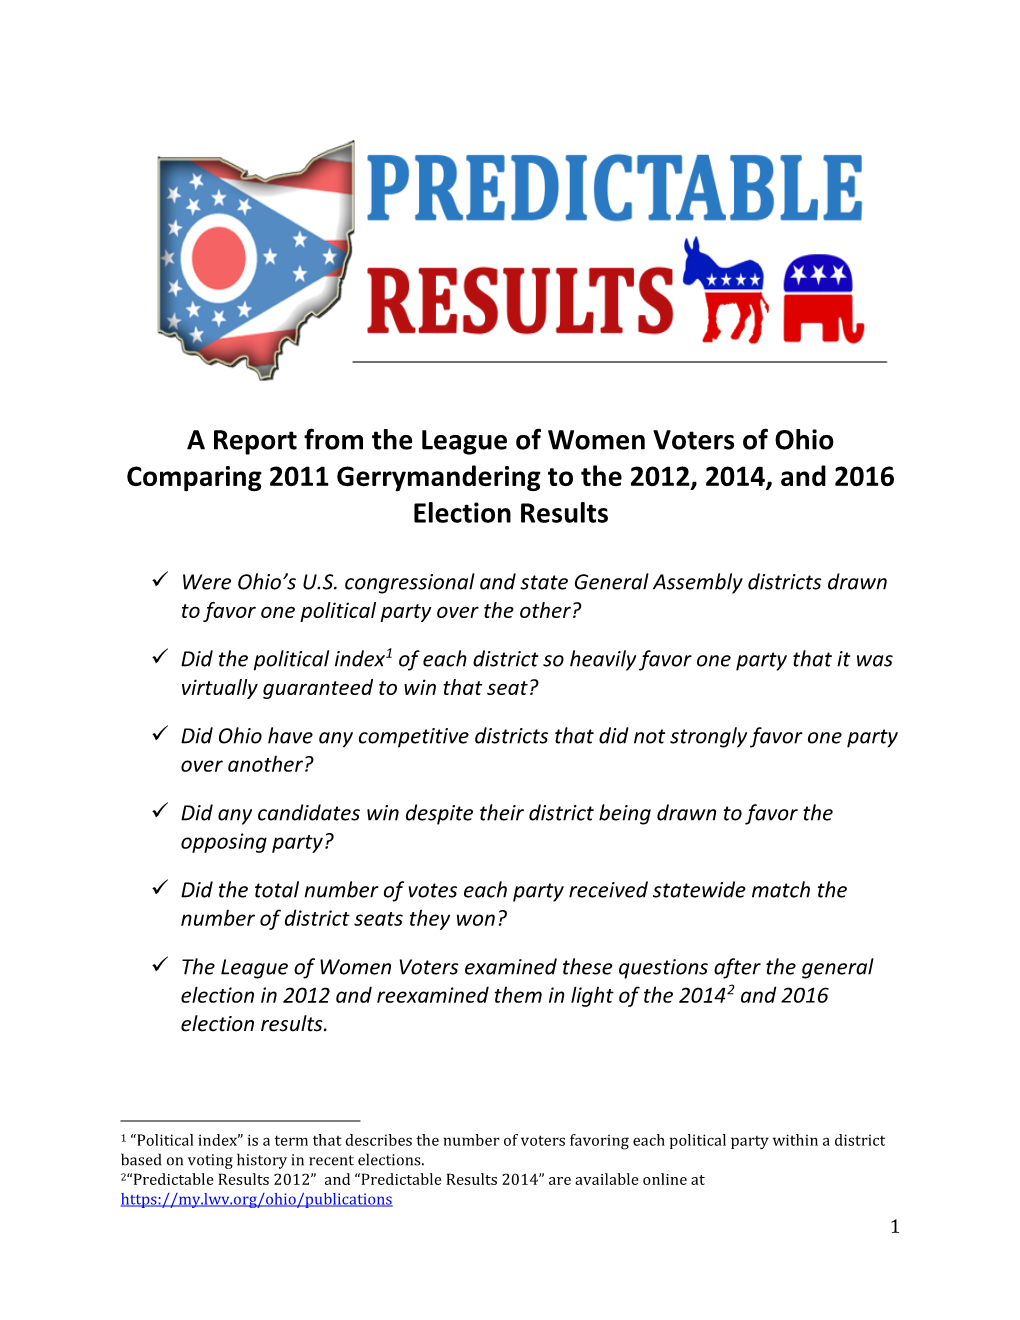 A Report from the League of Women Voters of Ohio Comparing 2011 Gerrymandering to the 2012, 2014, and 2016 Election Results